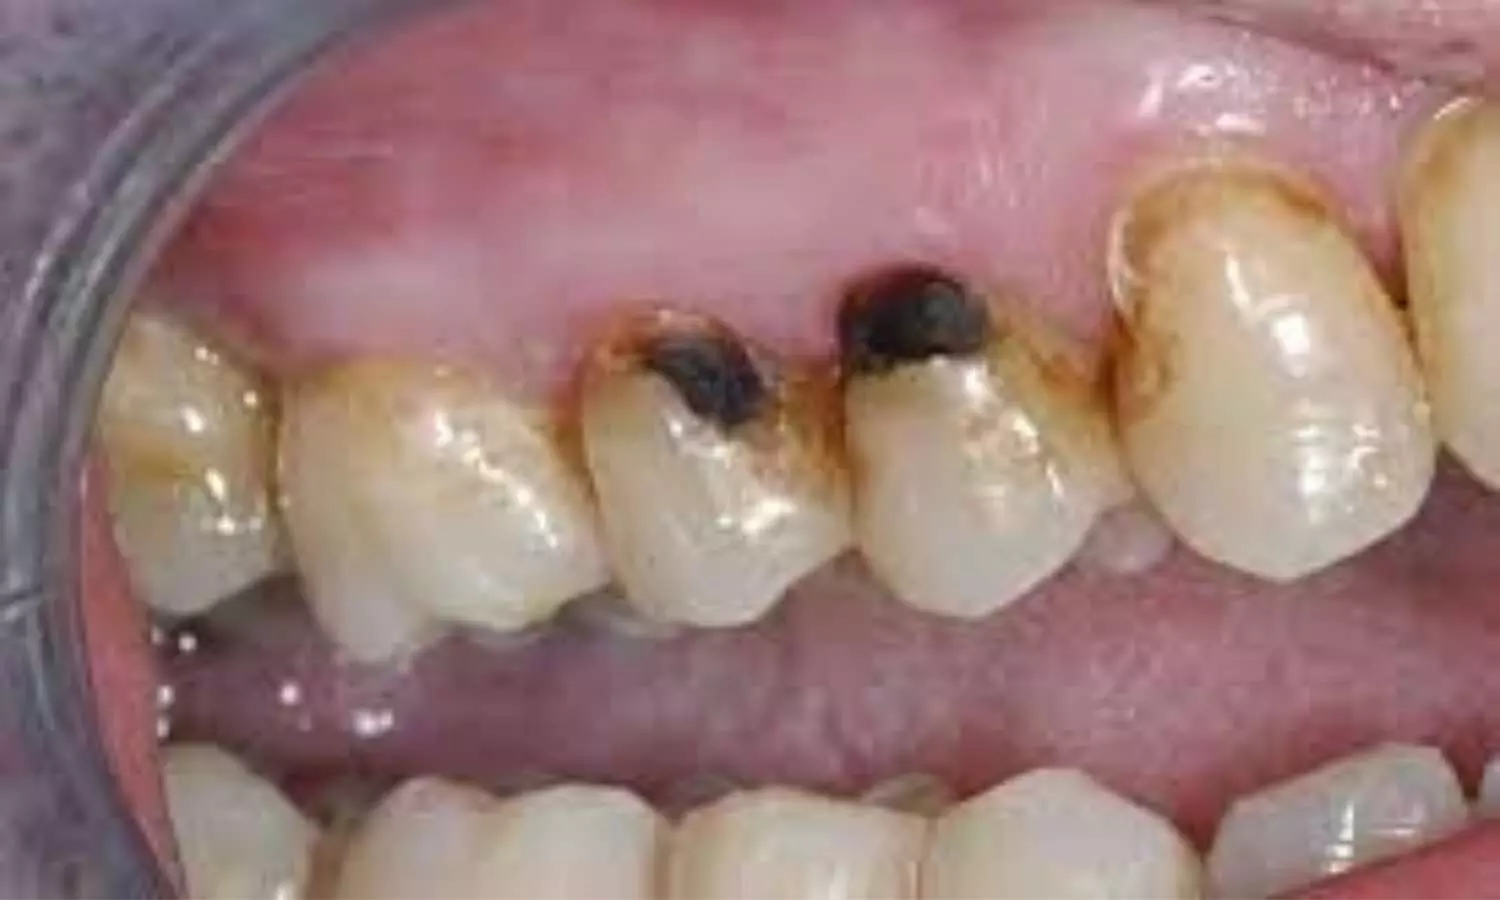 Permanent discolouration important barrier to acceptance of SDF treatment for visible root caries by elderly